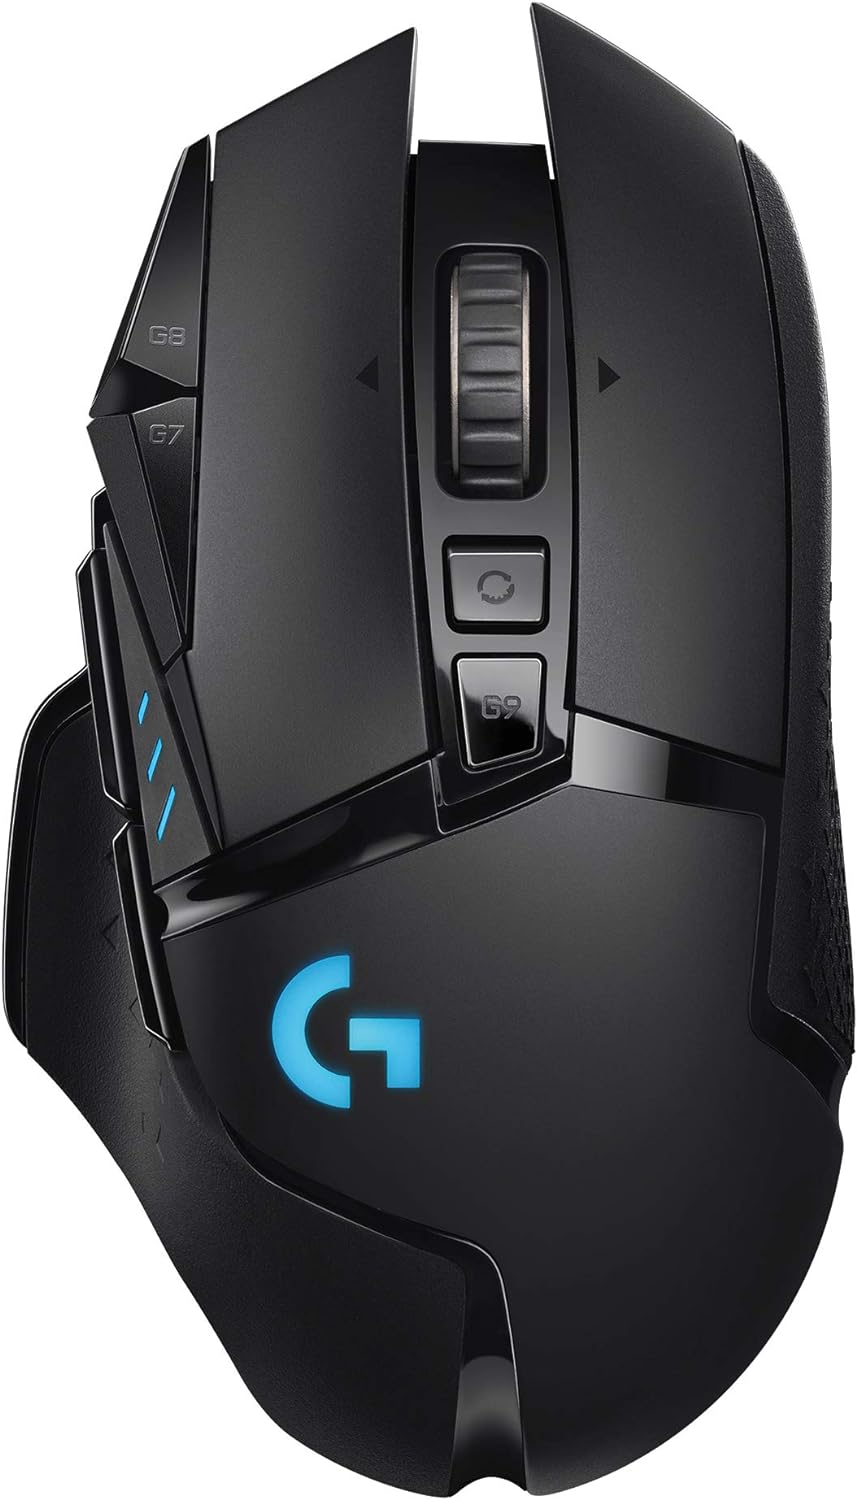 Find the Best Gaming Mouse: Our Top 5 Picks to Level Up Your Gaming Setup